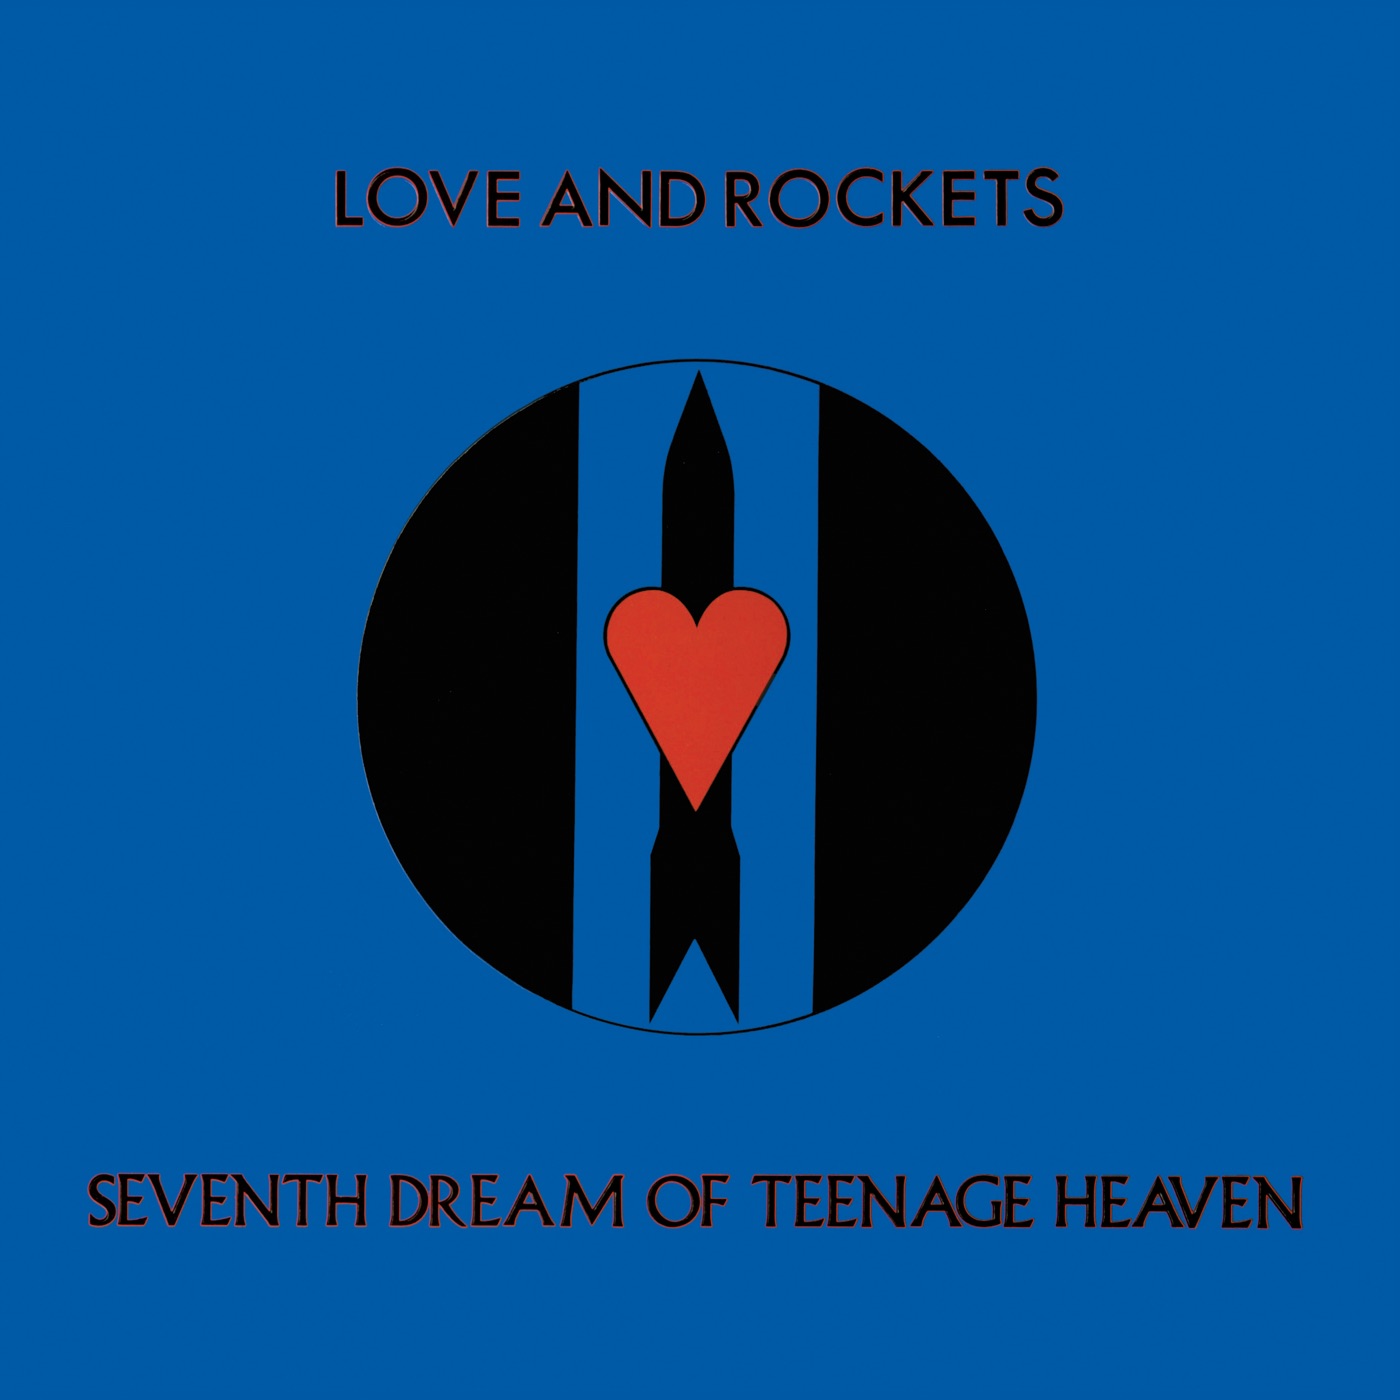 Seventh Dream of Teenage Heaven by Love and Rockets